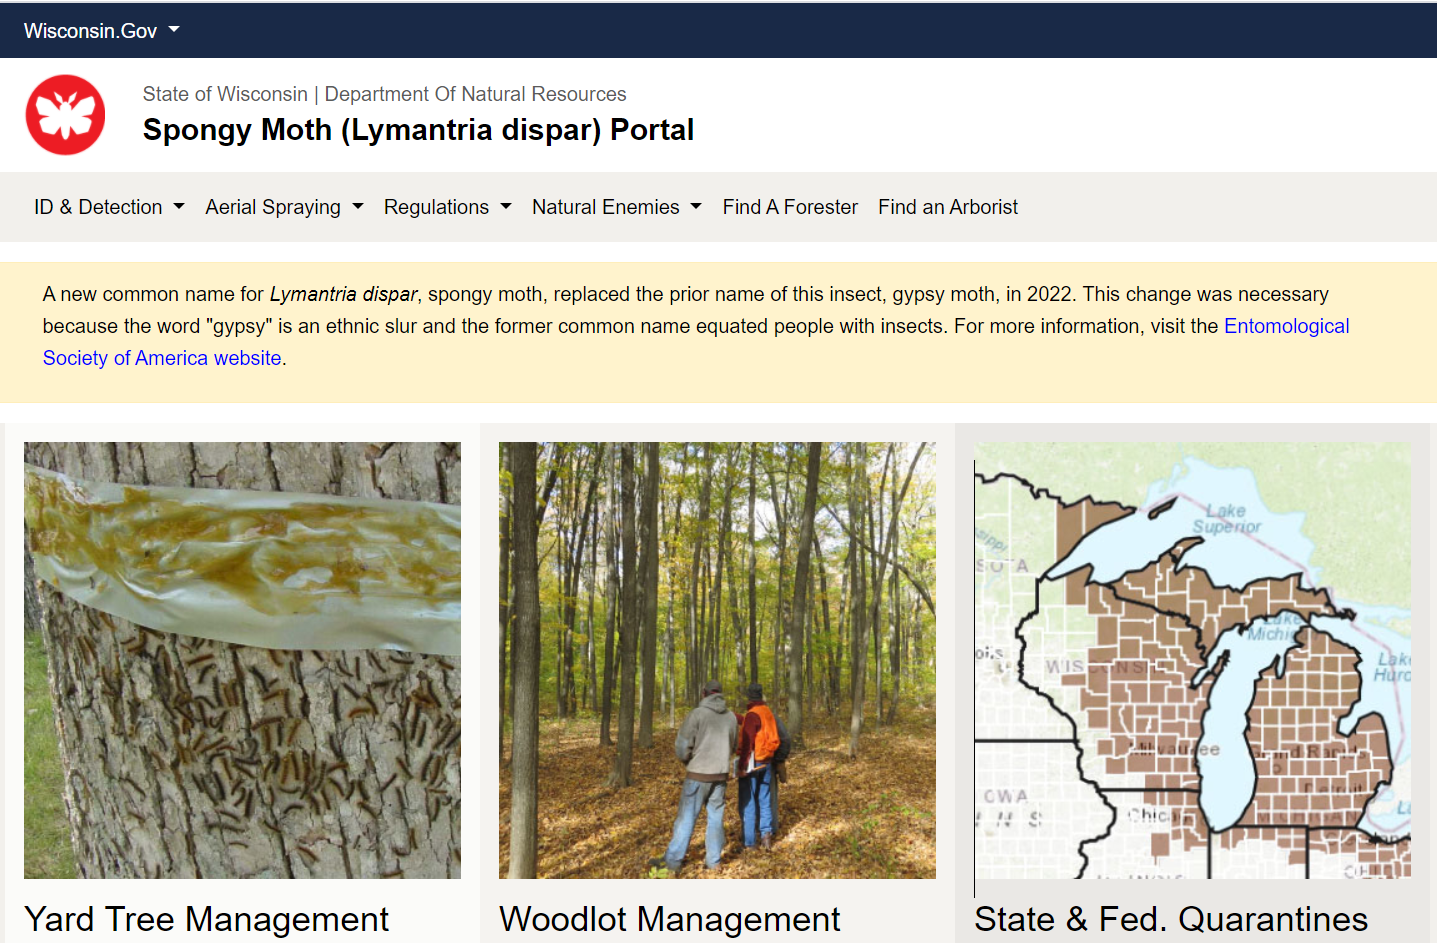 A screenshot of the new spongy moth portal home page.